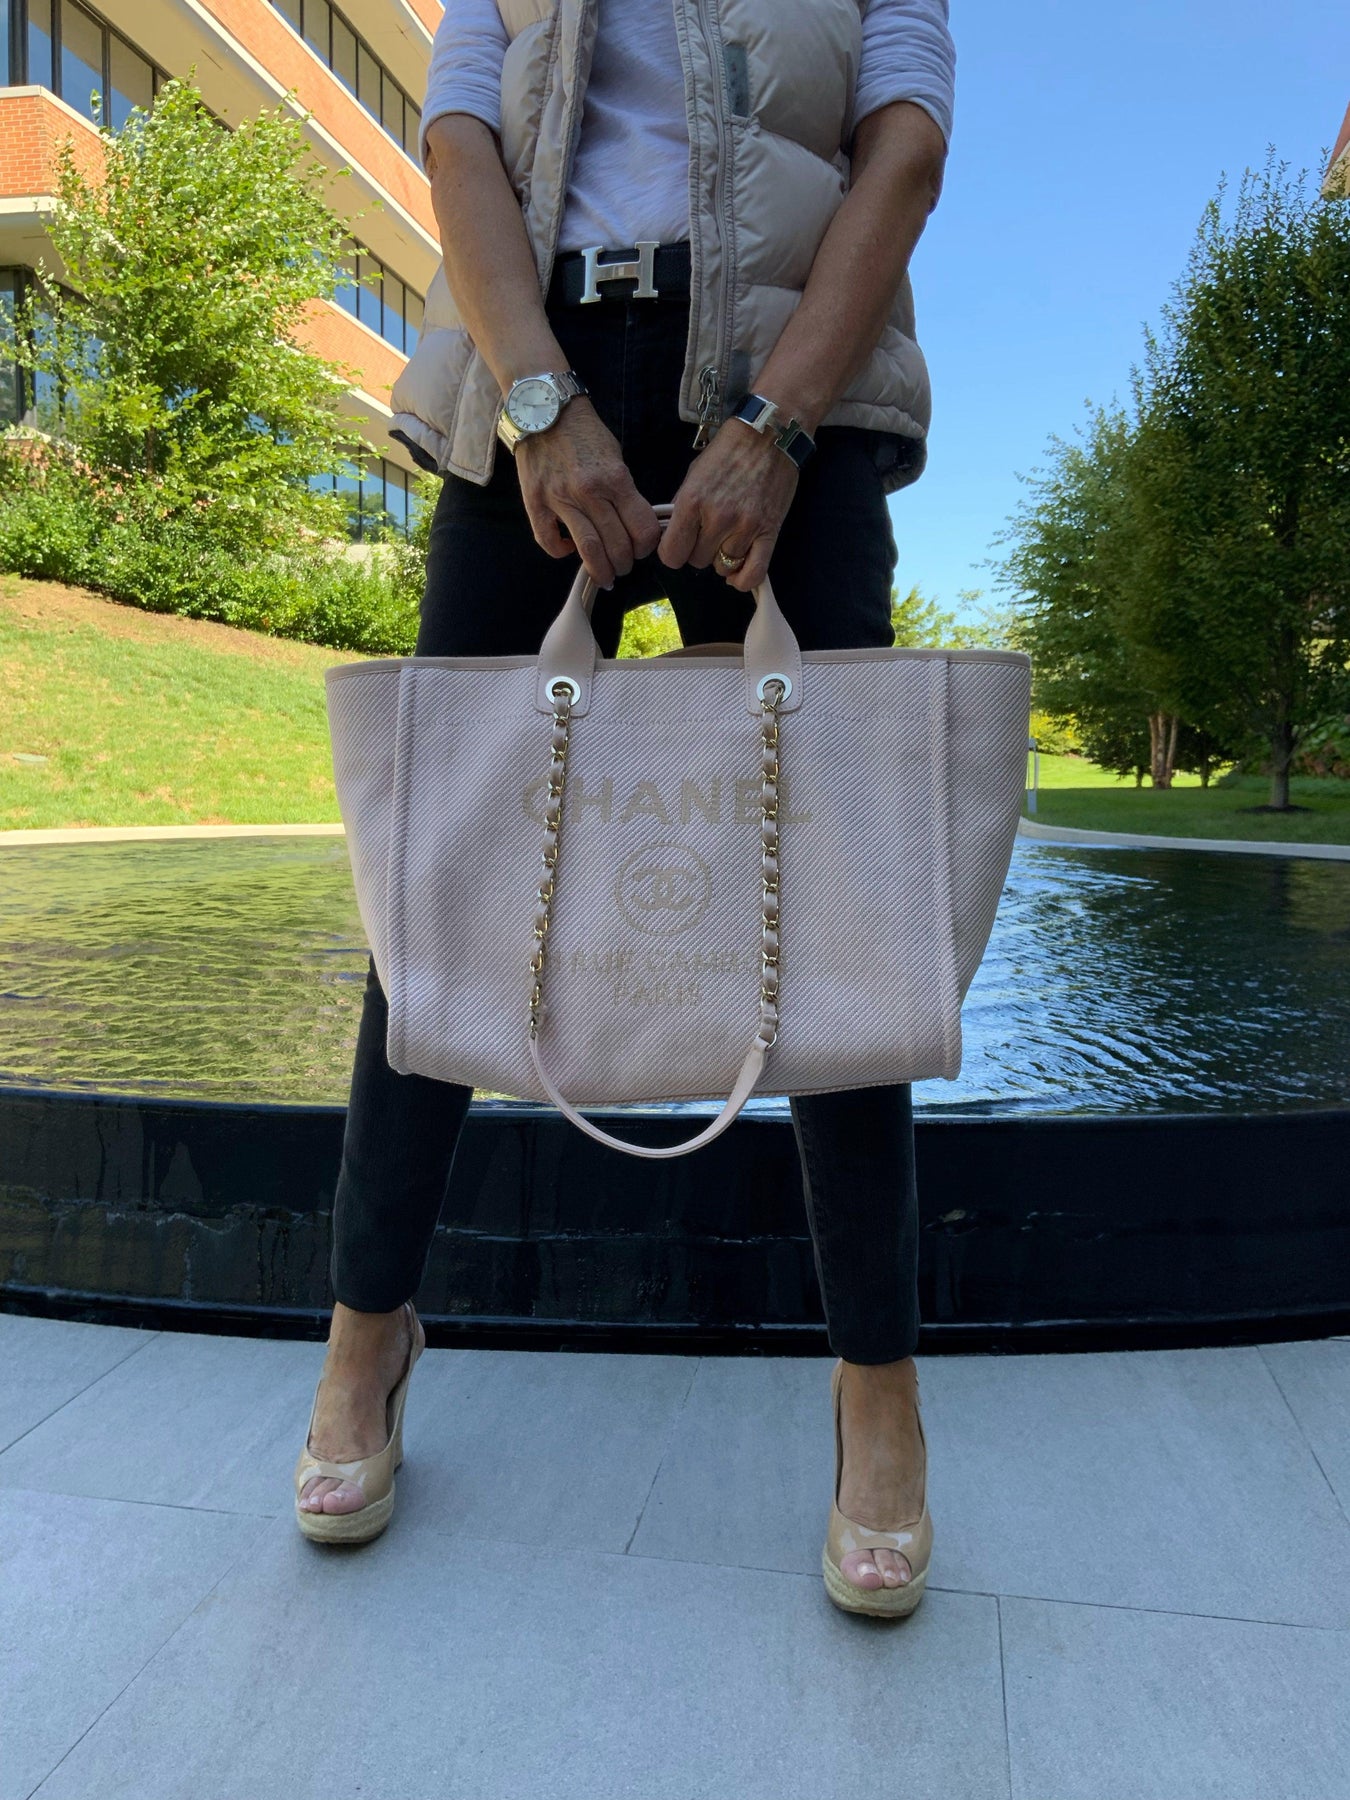 Chanel Medium Deauville Tote Bag - Kaialux